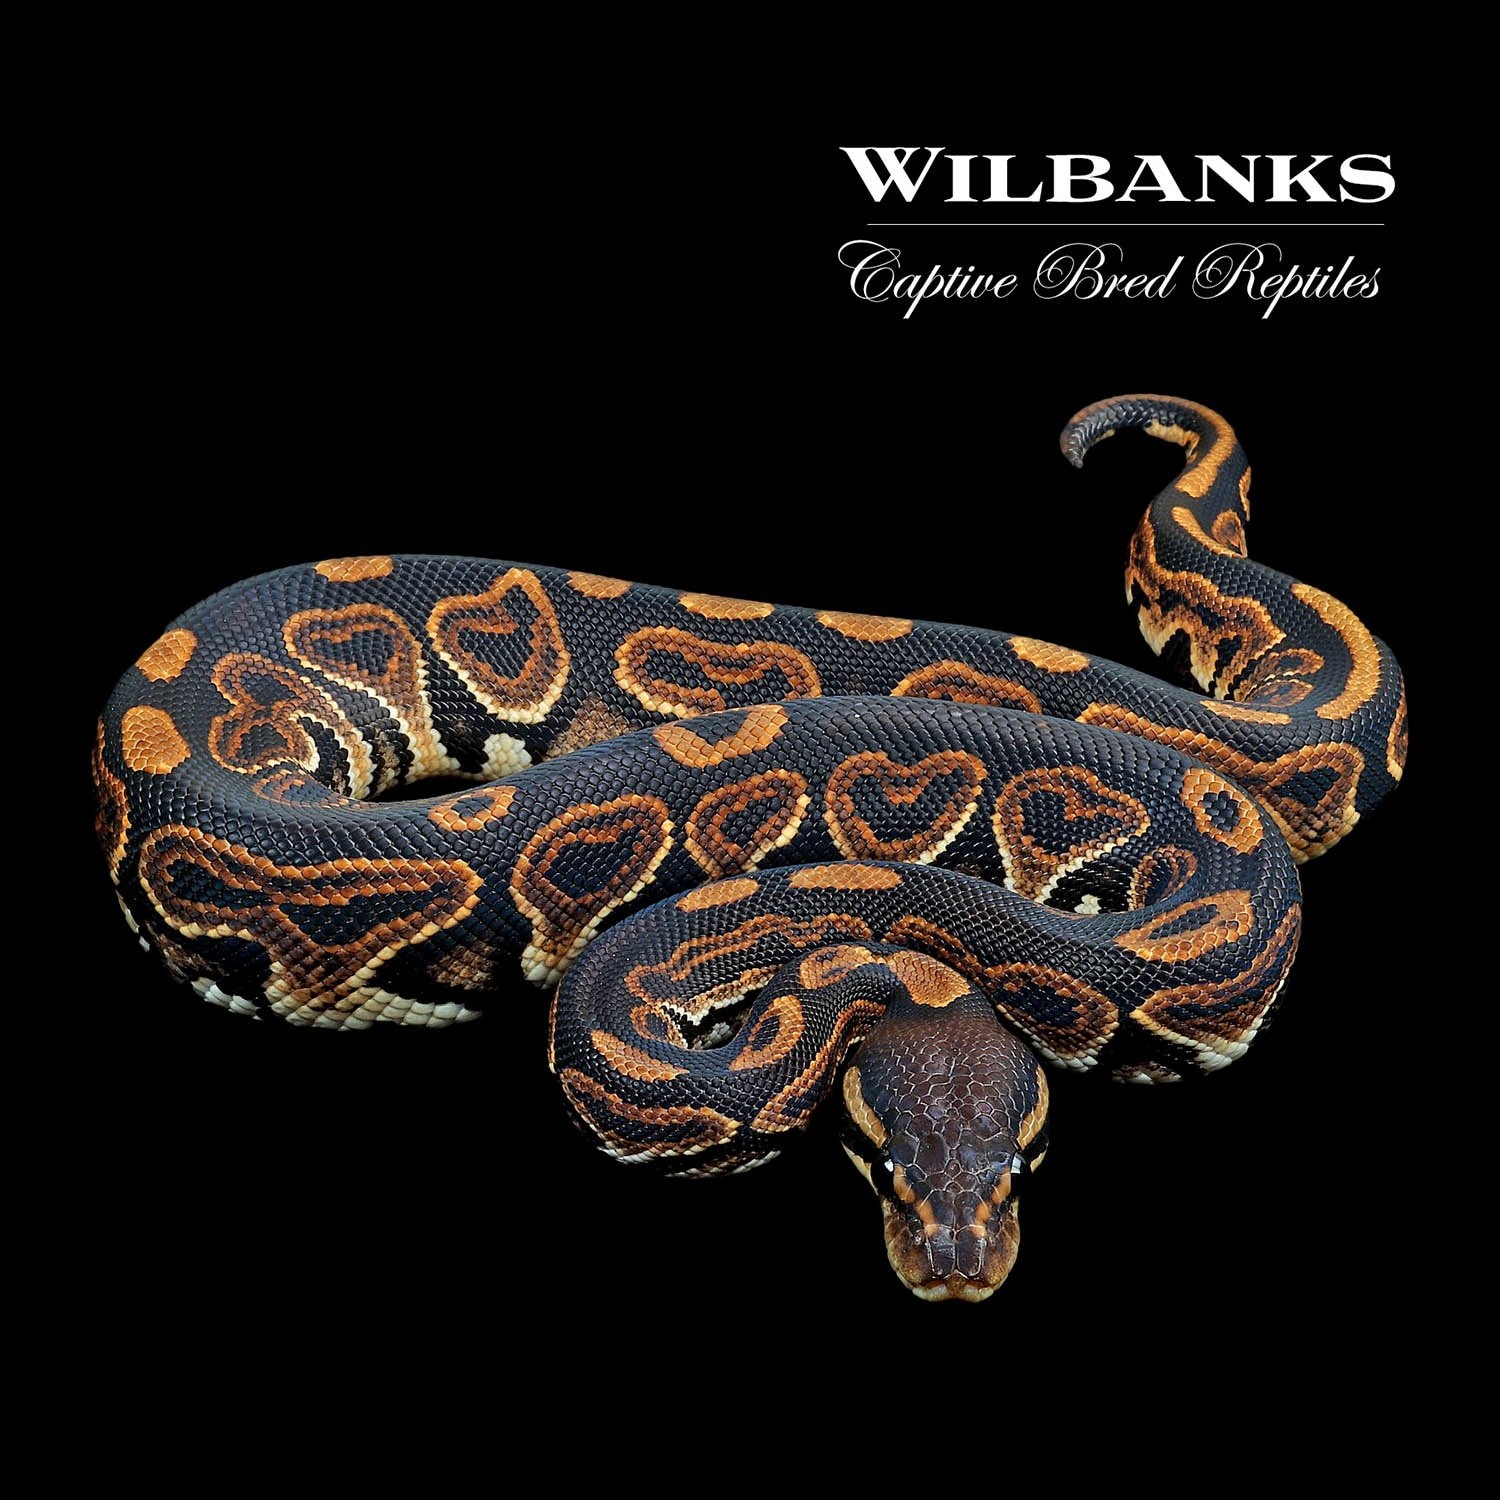 Black Pastel Ball Python by Wilbanks Captive Bred Reptiles